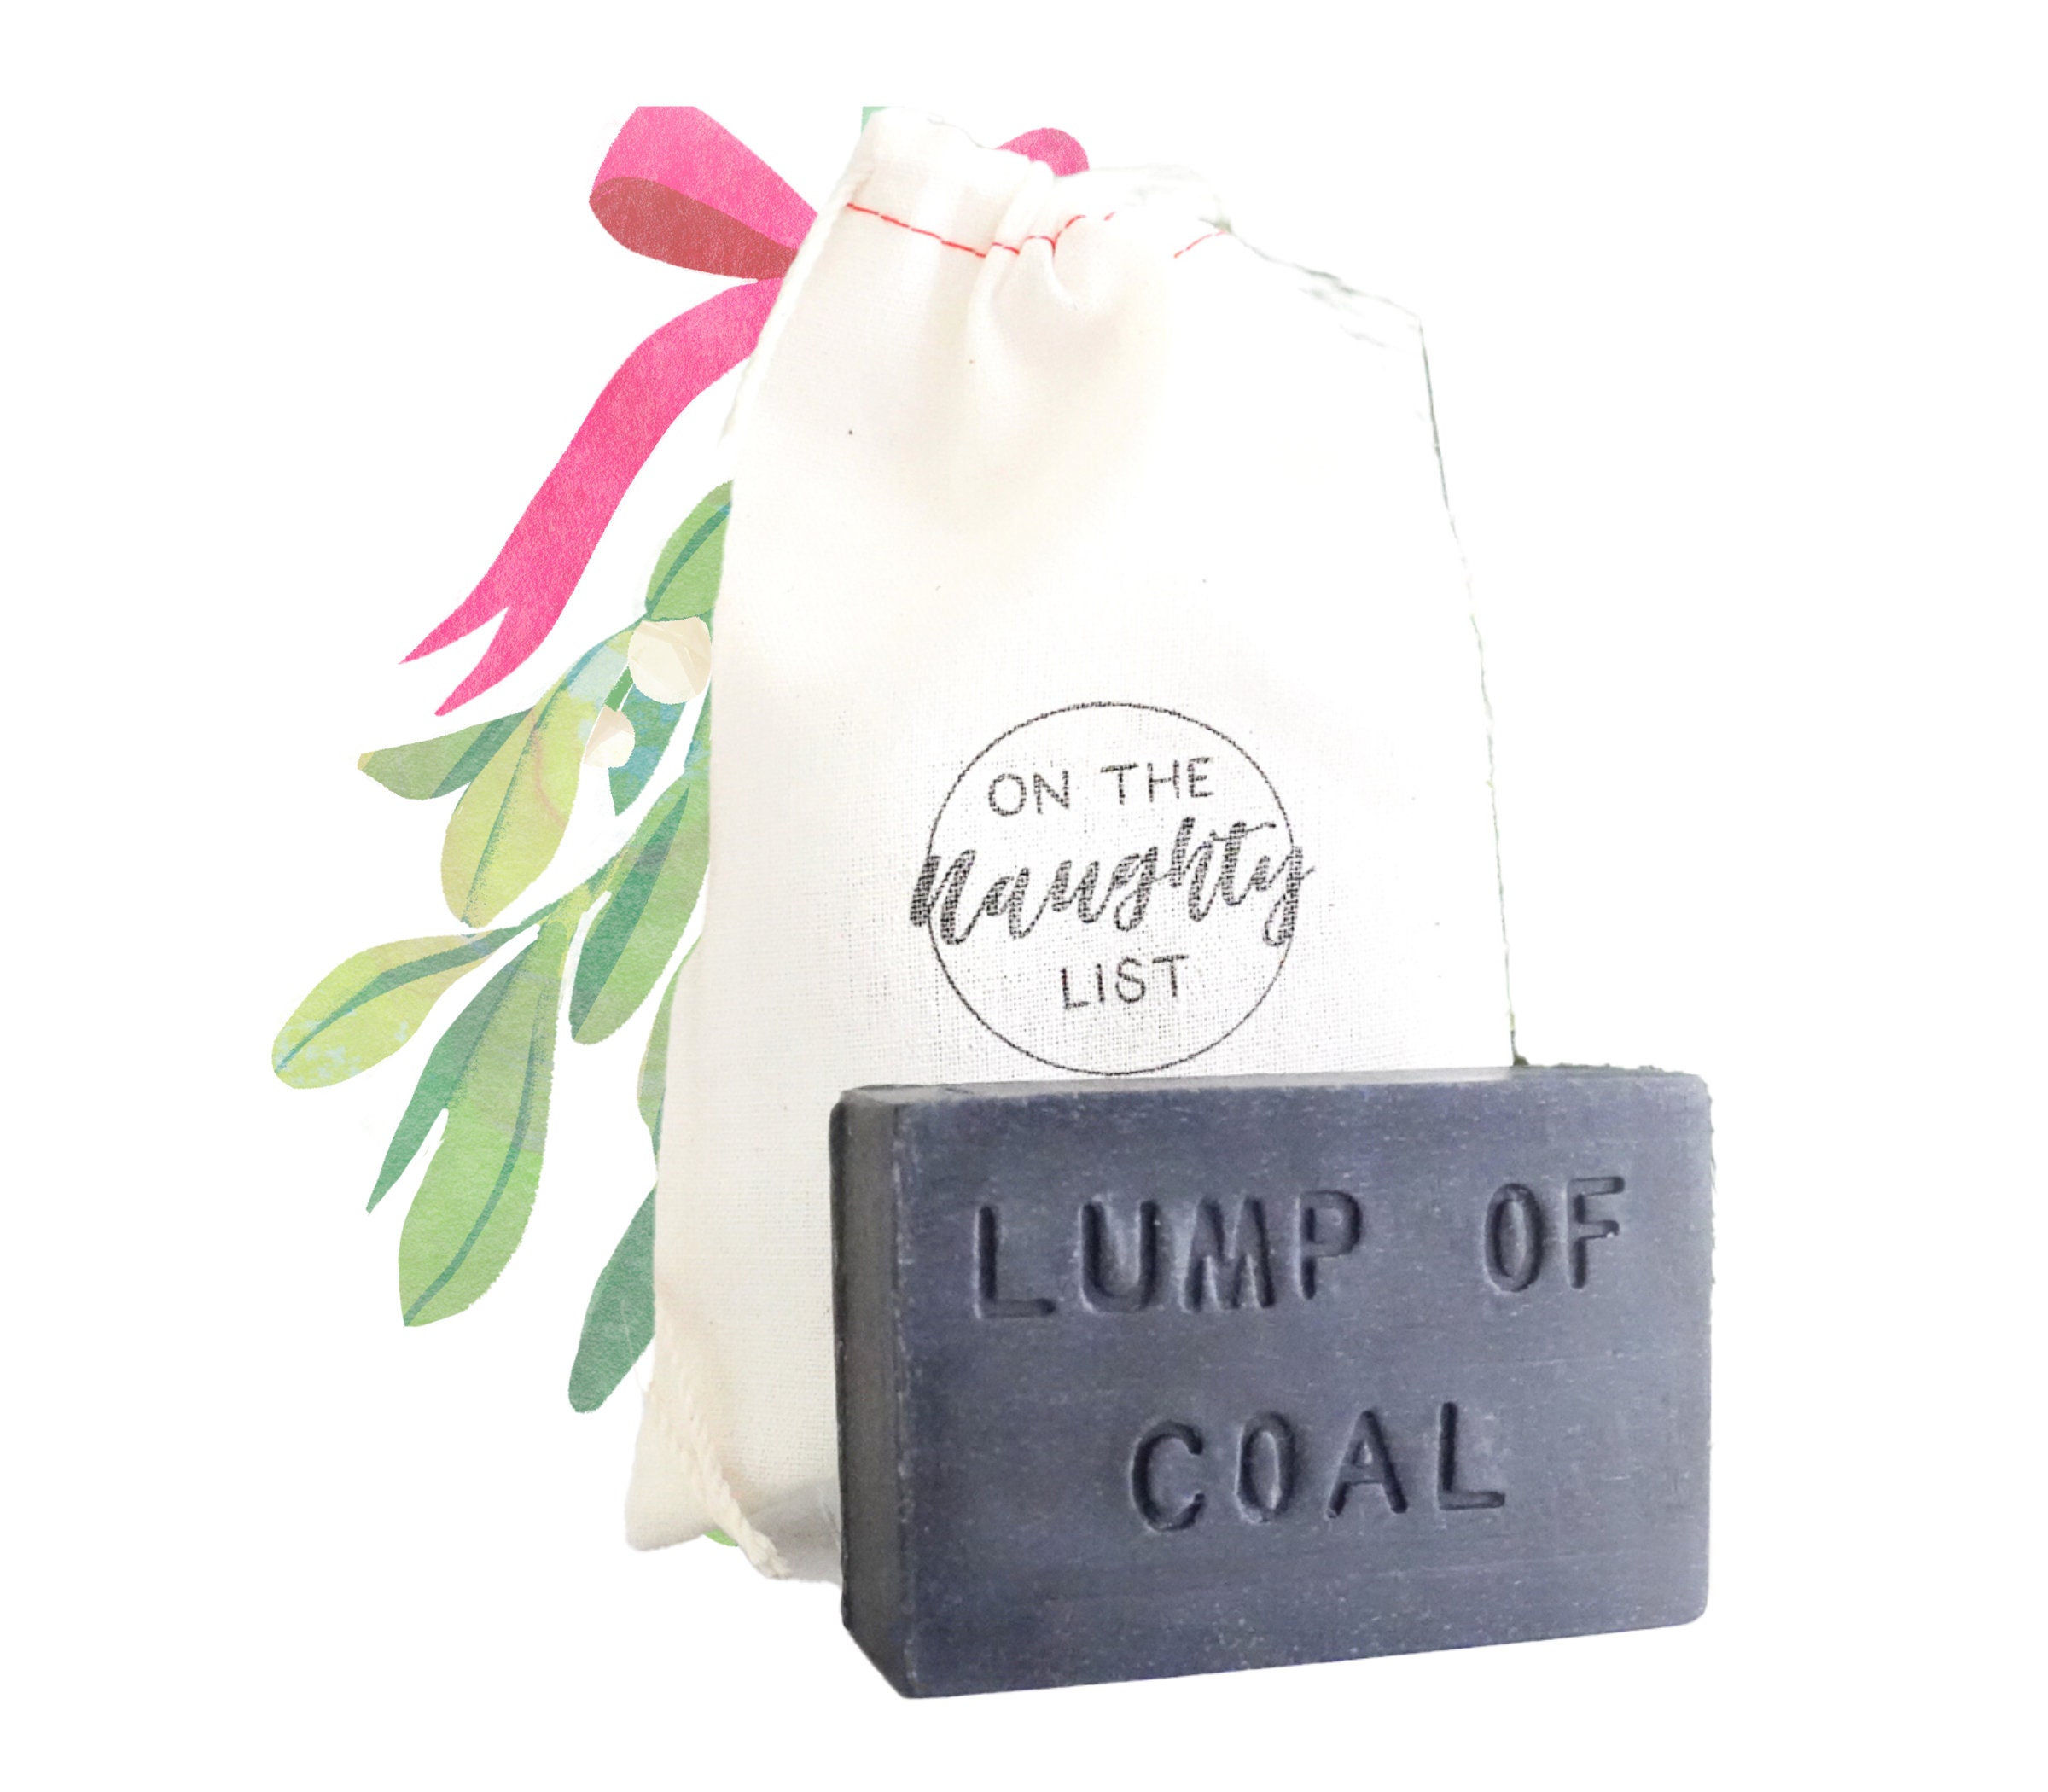 Whiskey Gift / Funny Gifts for Men or Women / Whiskey Bar Soap / Small Gift  for Her or Him / Stocking Stuffers / Gag Gift / Unique 